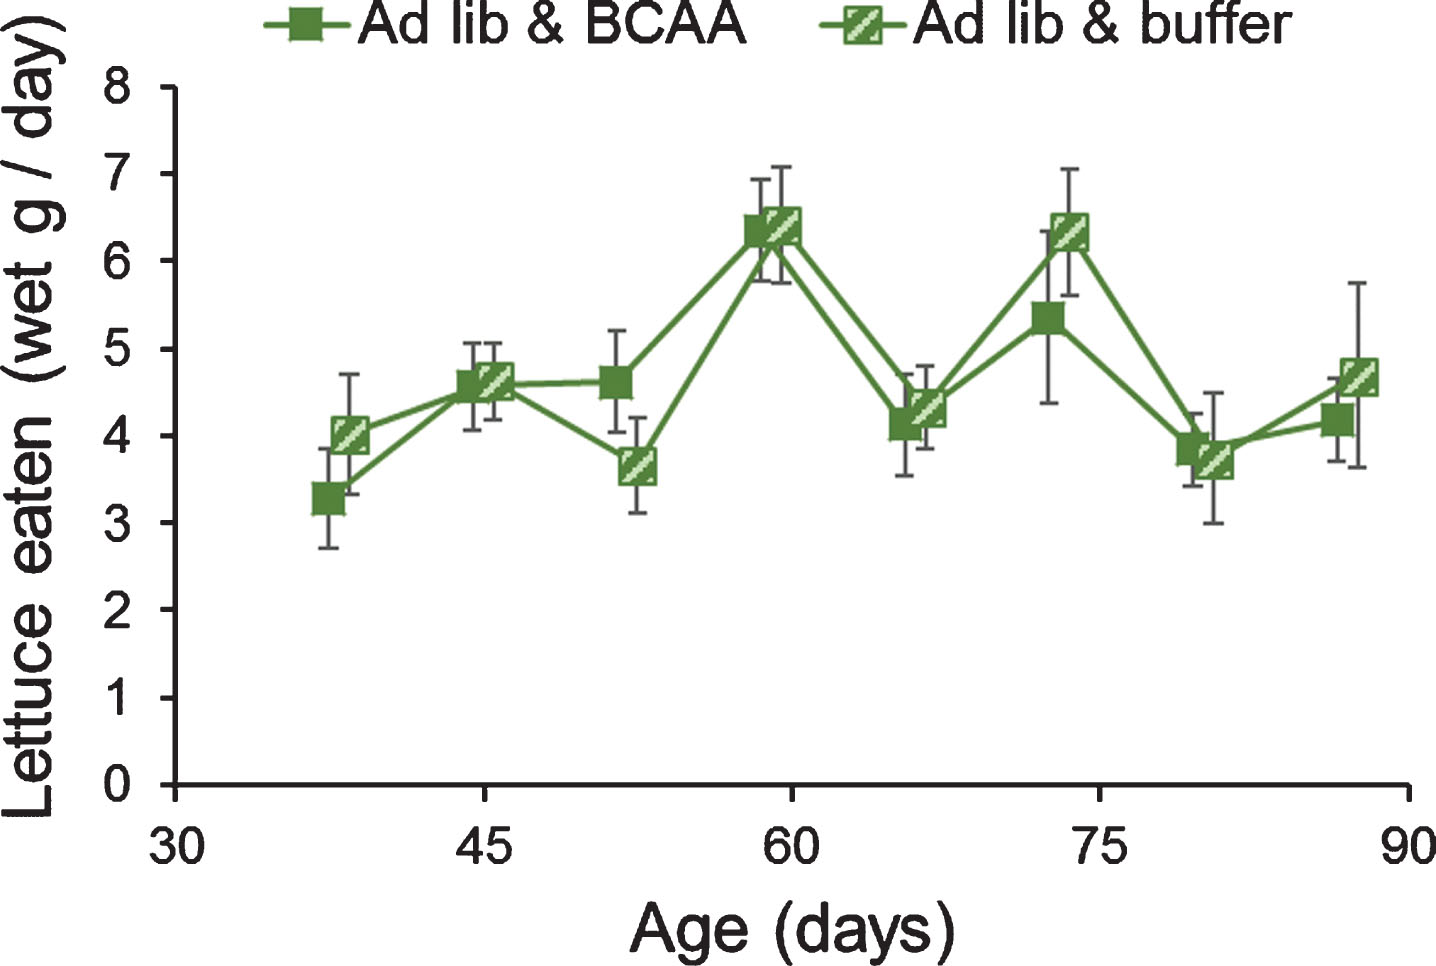 Dietary supplementation of BCAAs did not alter lettuce feeding in grasshoppers. Adult female grasshoppers were reared on ad libitum lettuce & BCAA or on ad libitum lettuce & buffer. Age refers to days after adult molt. Feeding rates varied week to week, but not due to supplementation of BCAAs. Data were tested via one-way repeated-measures ANOVA. Data are offset to show±1 Standard Error bars.